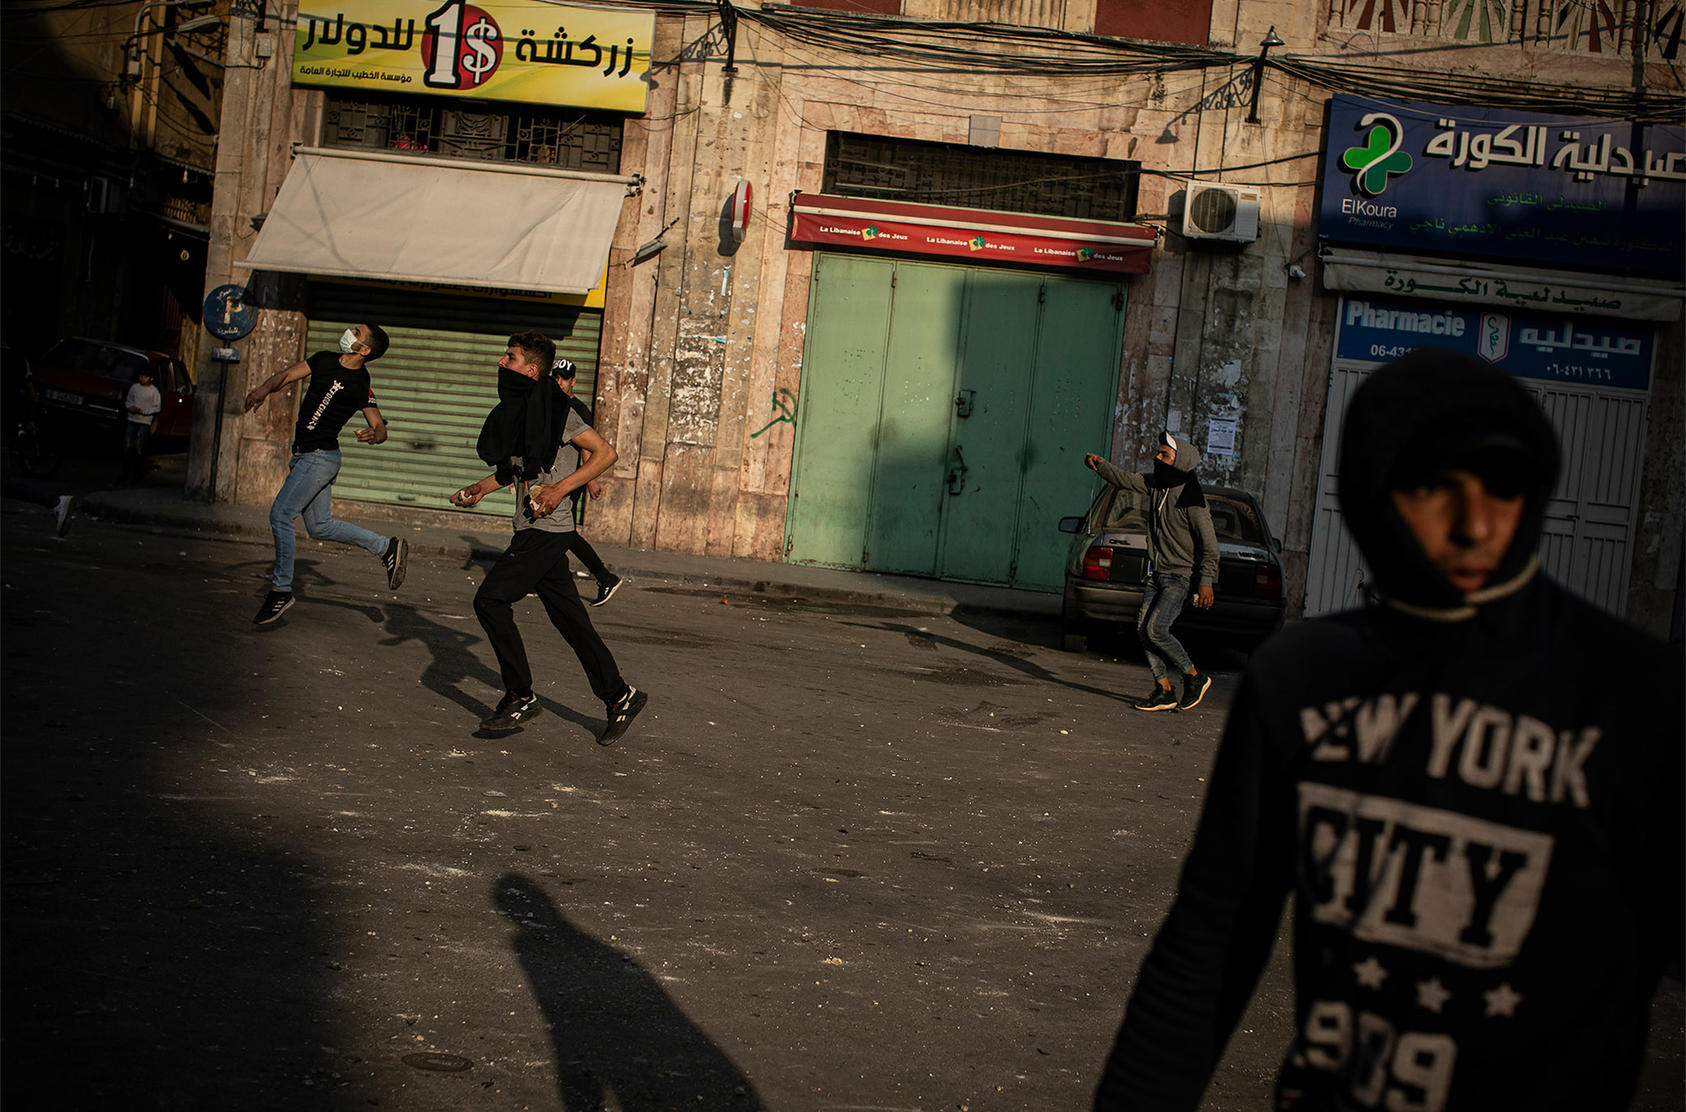 Antigovernment protesters clash with security forces in the northern city of Tripoli, Lebanon, April 29, 2020. (Diego Ibarra Sanchez/The New York Times)